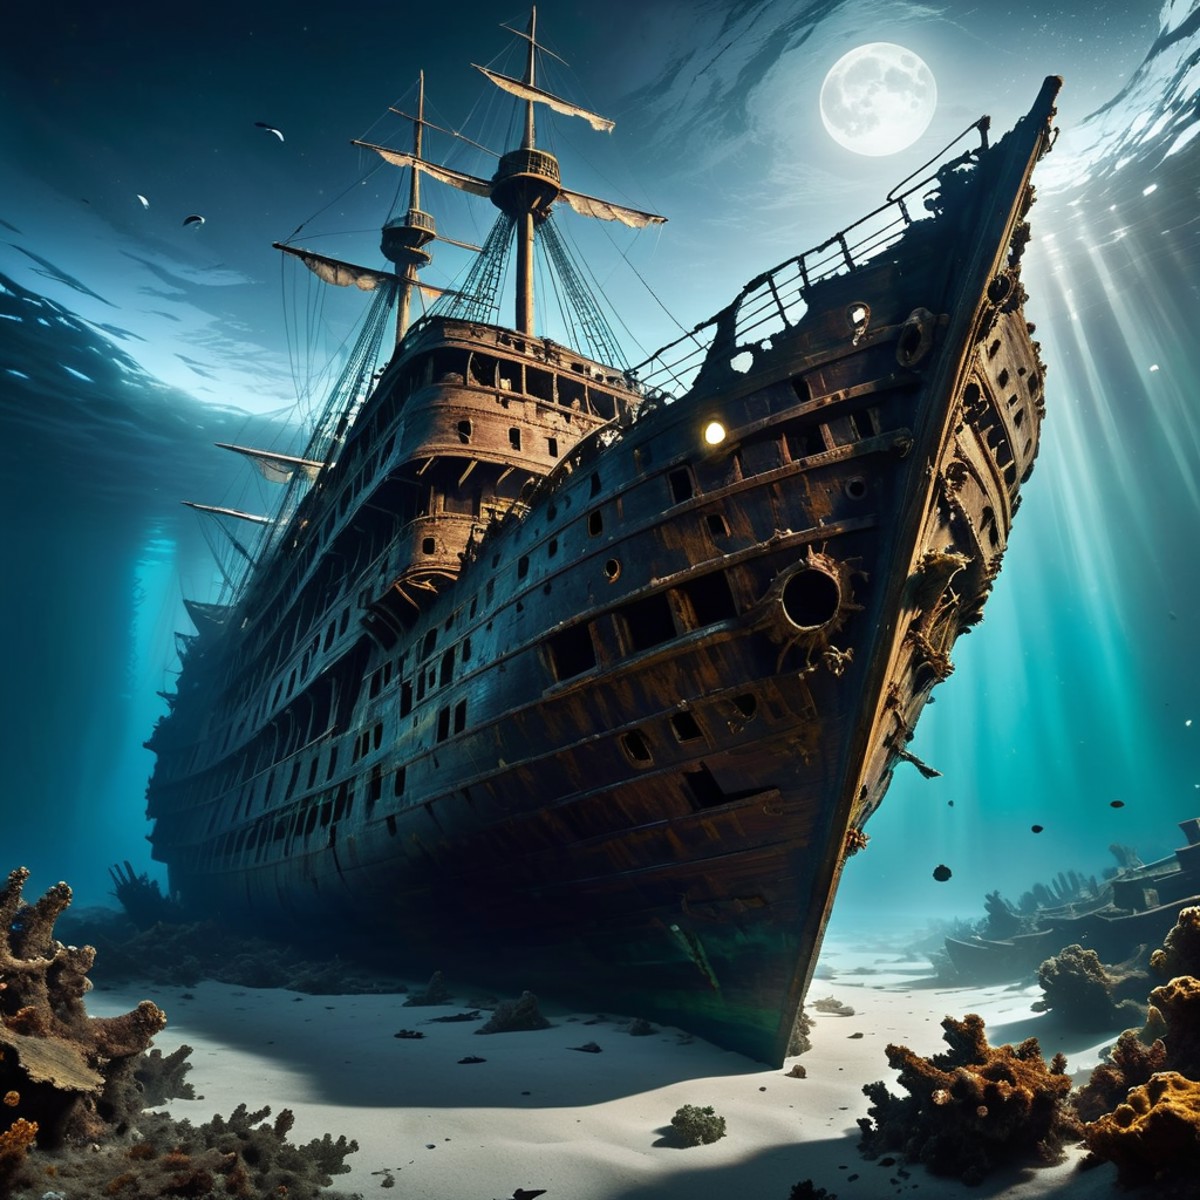 As you approach the haunting shipwreck, a sense of eerie desolation fills the air. The skeletal remains of a massive ship ...